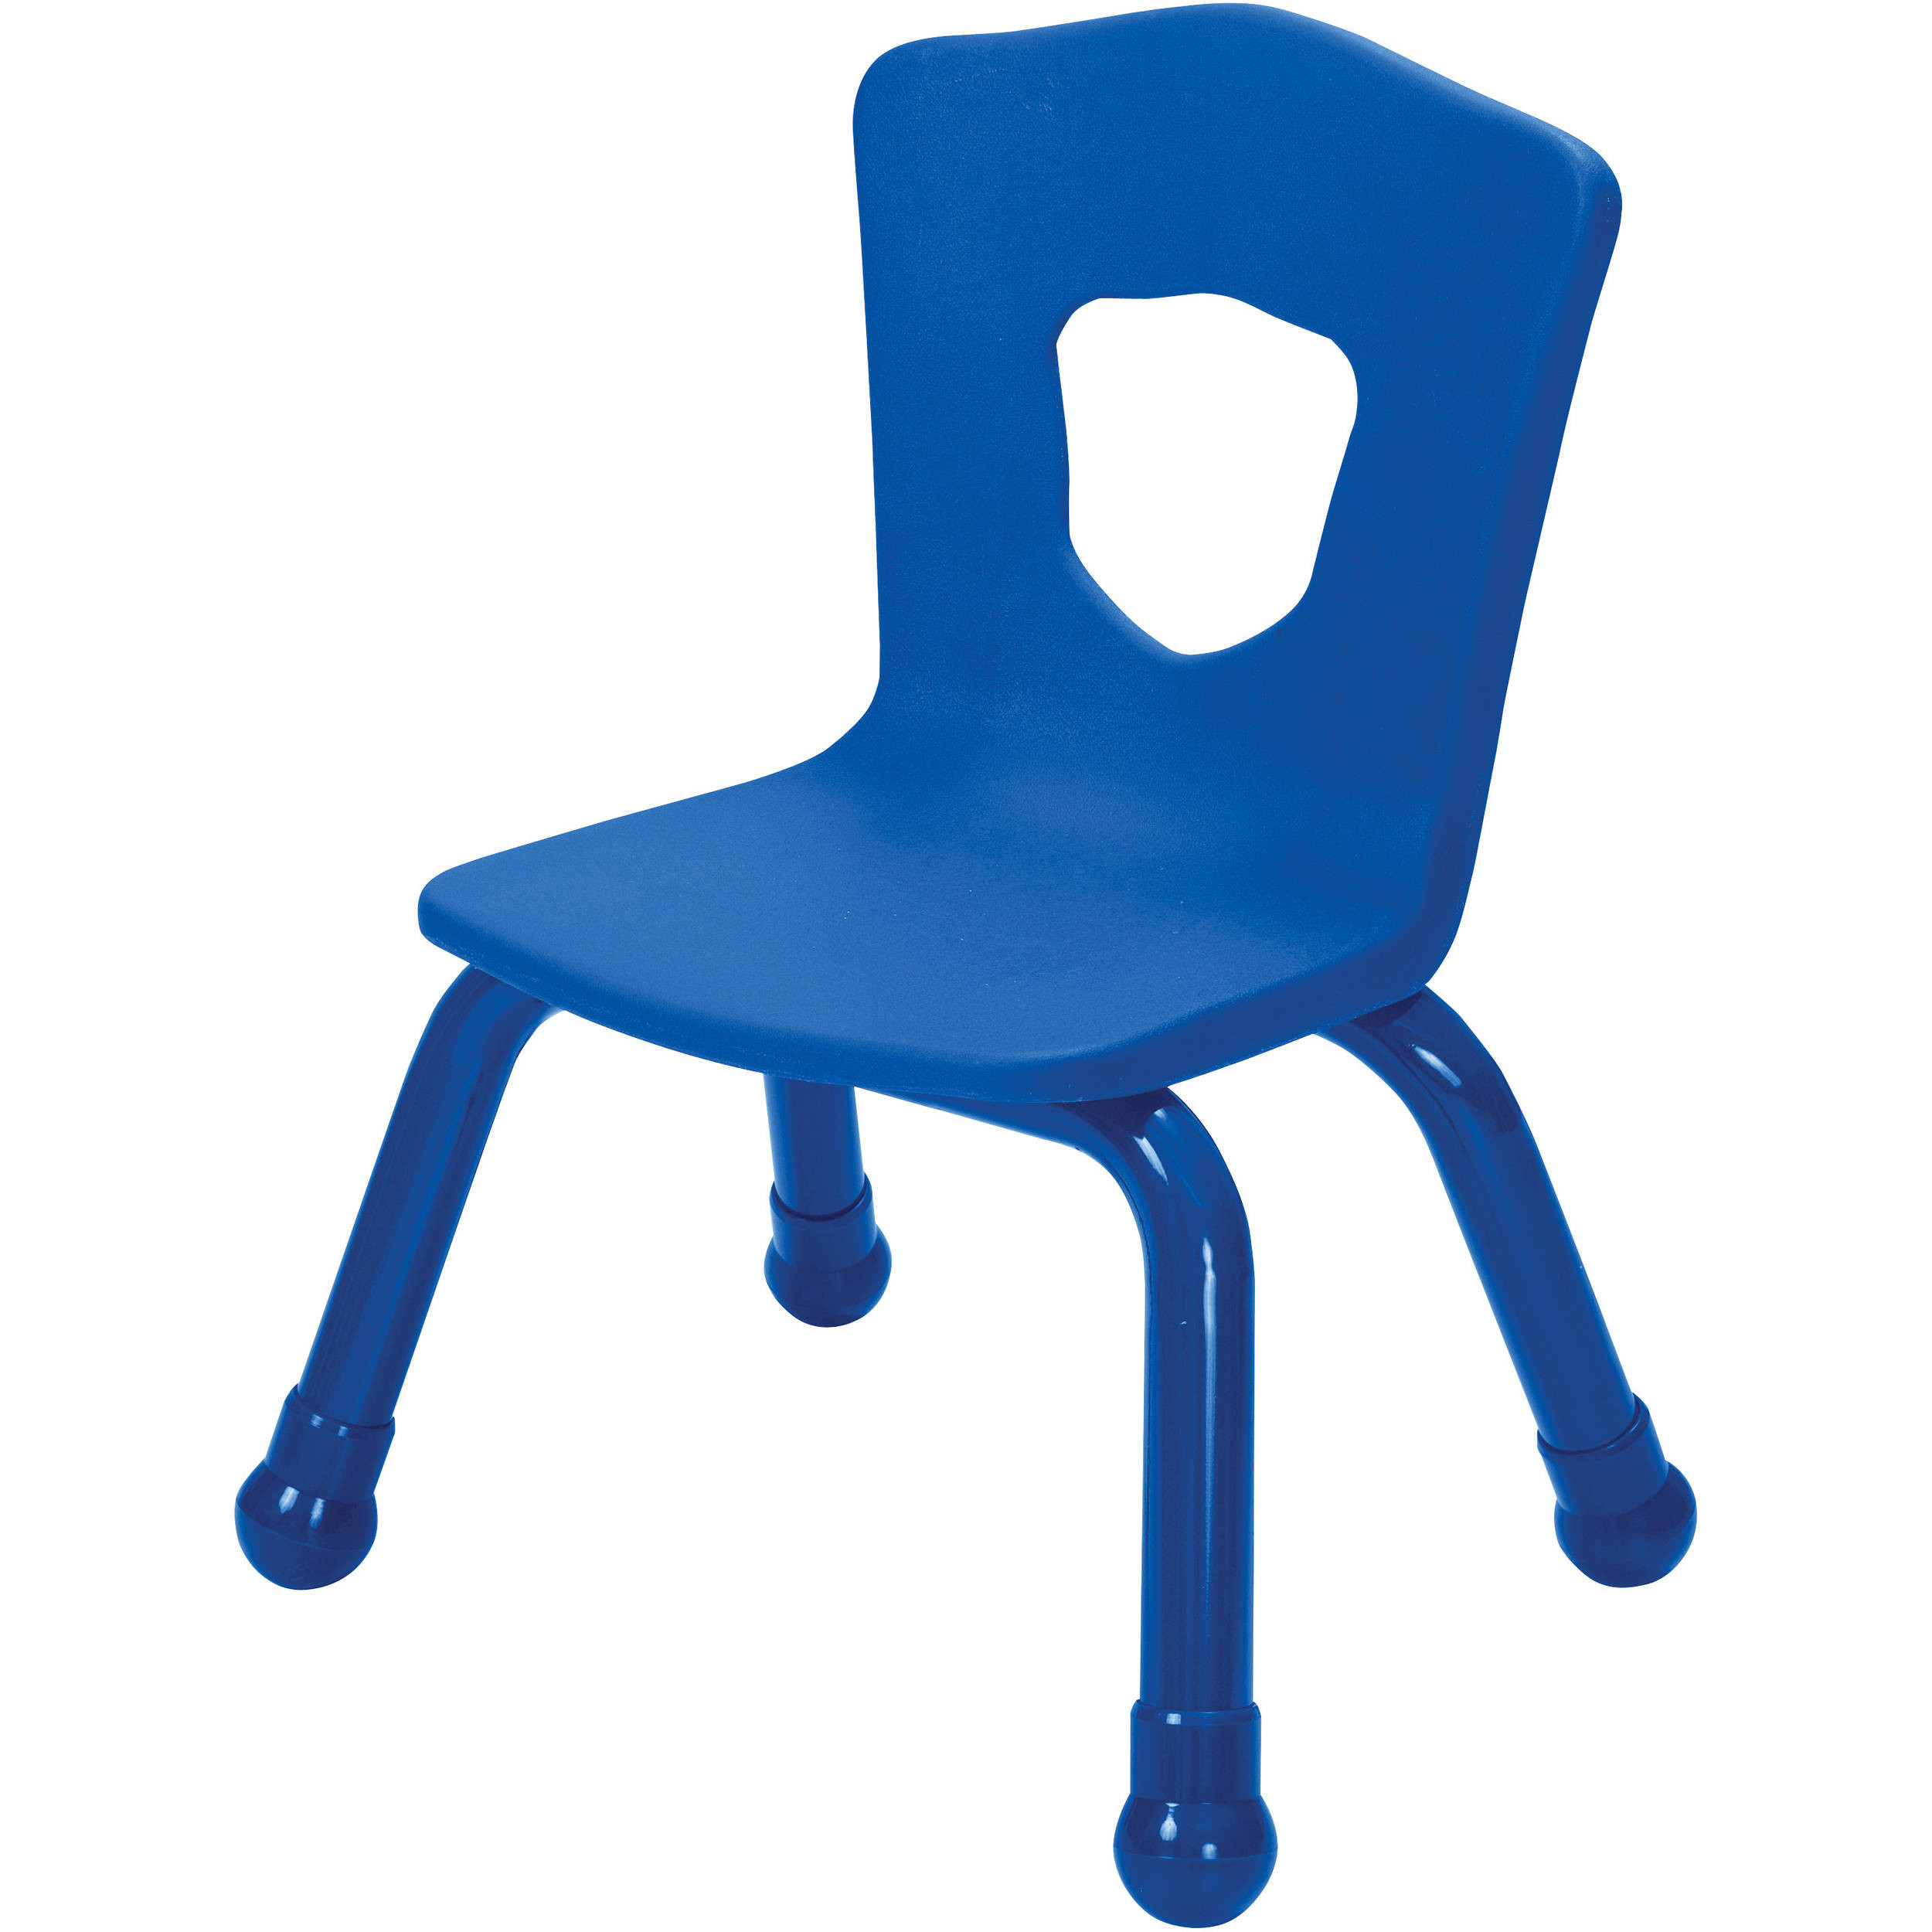 Chair For Kids
 Best Rite Brite Kids Chair Royal Blue Set of 4